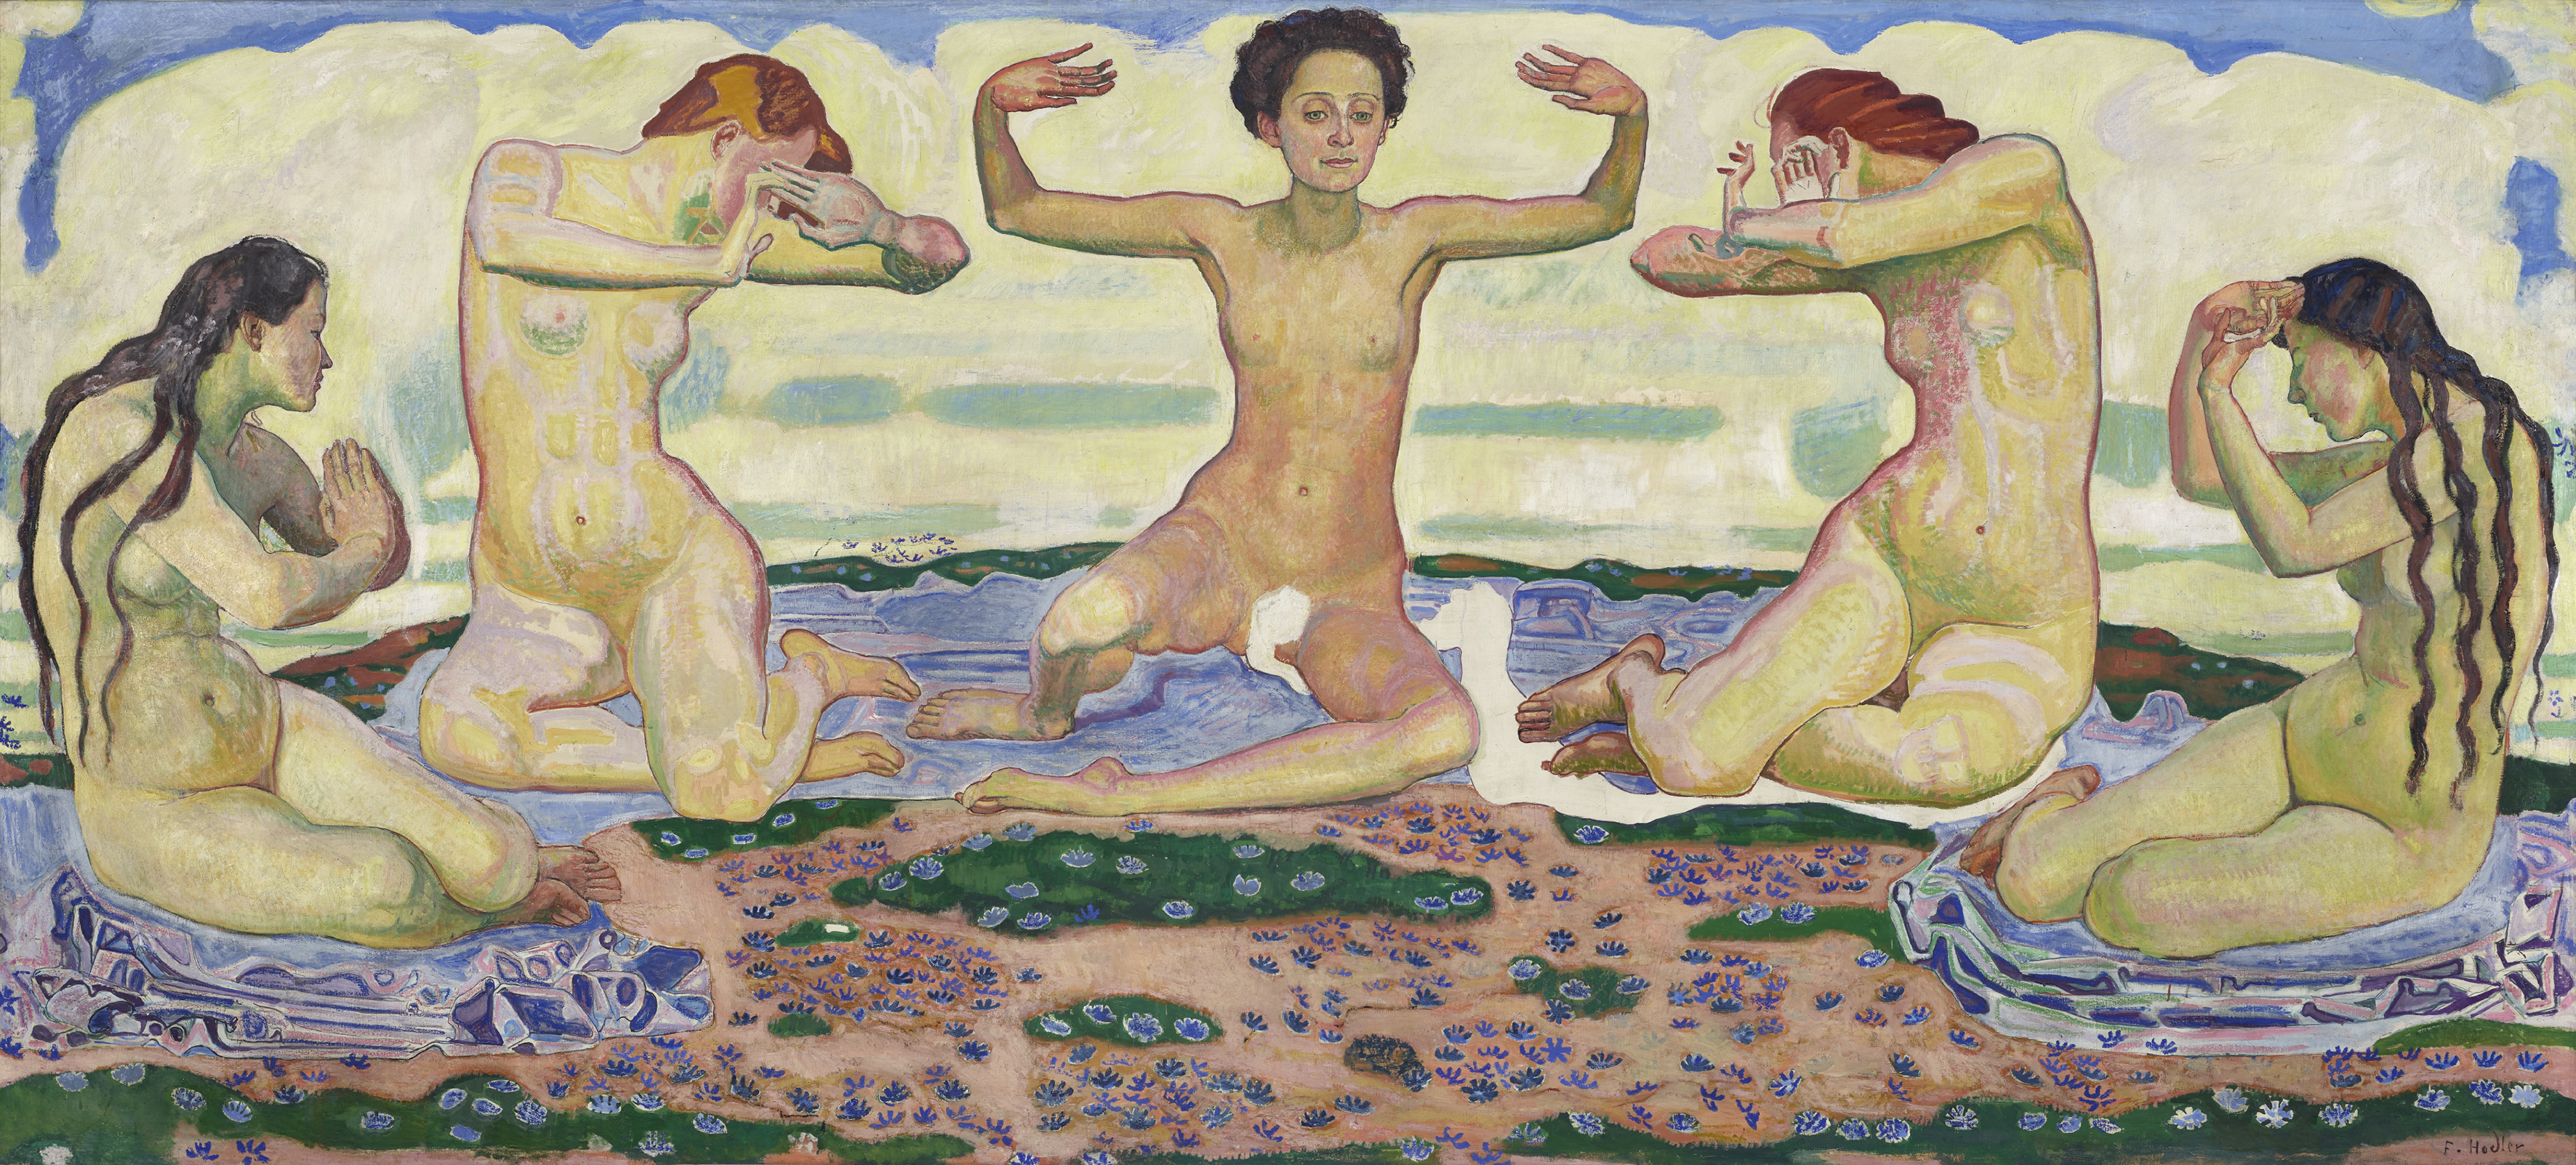 One of Hodler's more iconic works: Der Tag (The Day), 1904/1906